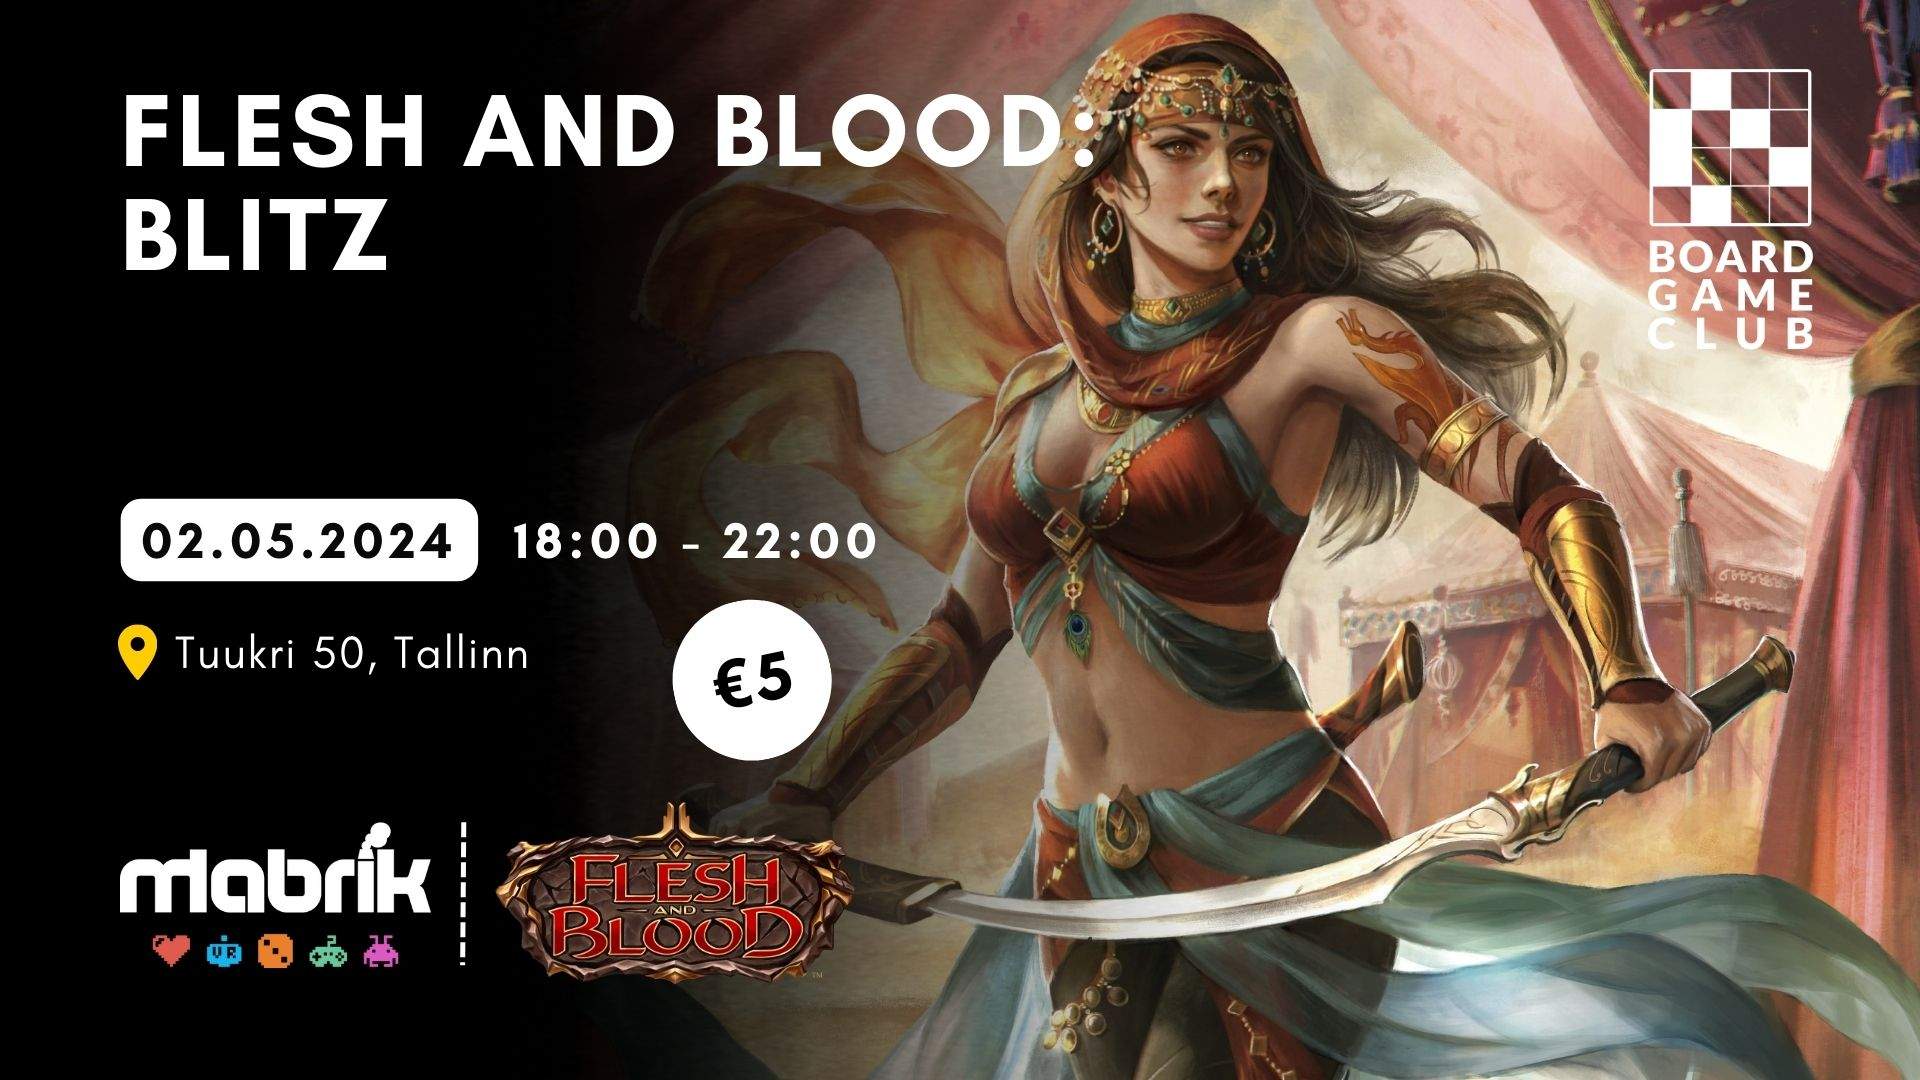 Events - 02.05.2024 - Flesh and Blood - Blitz